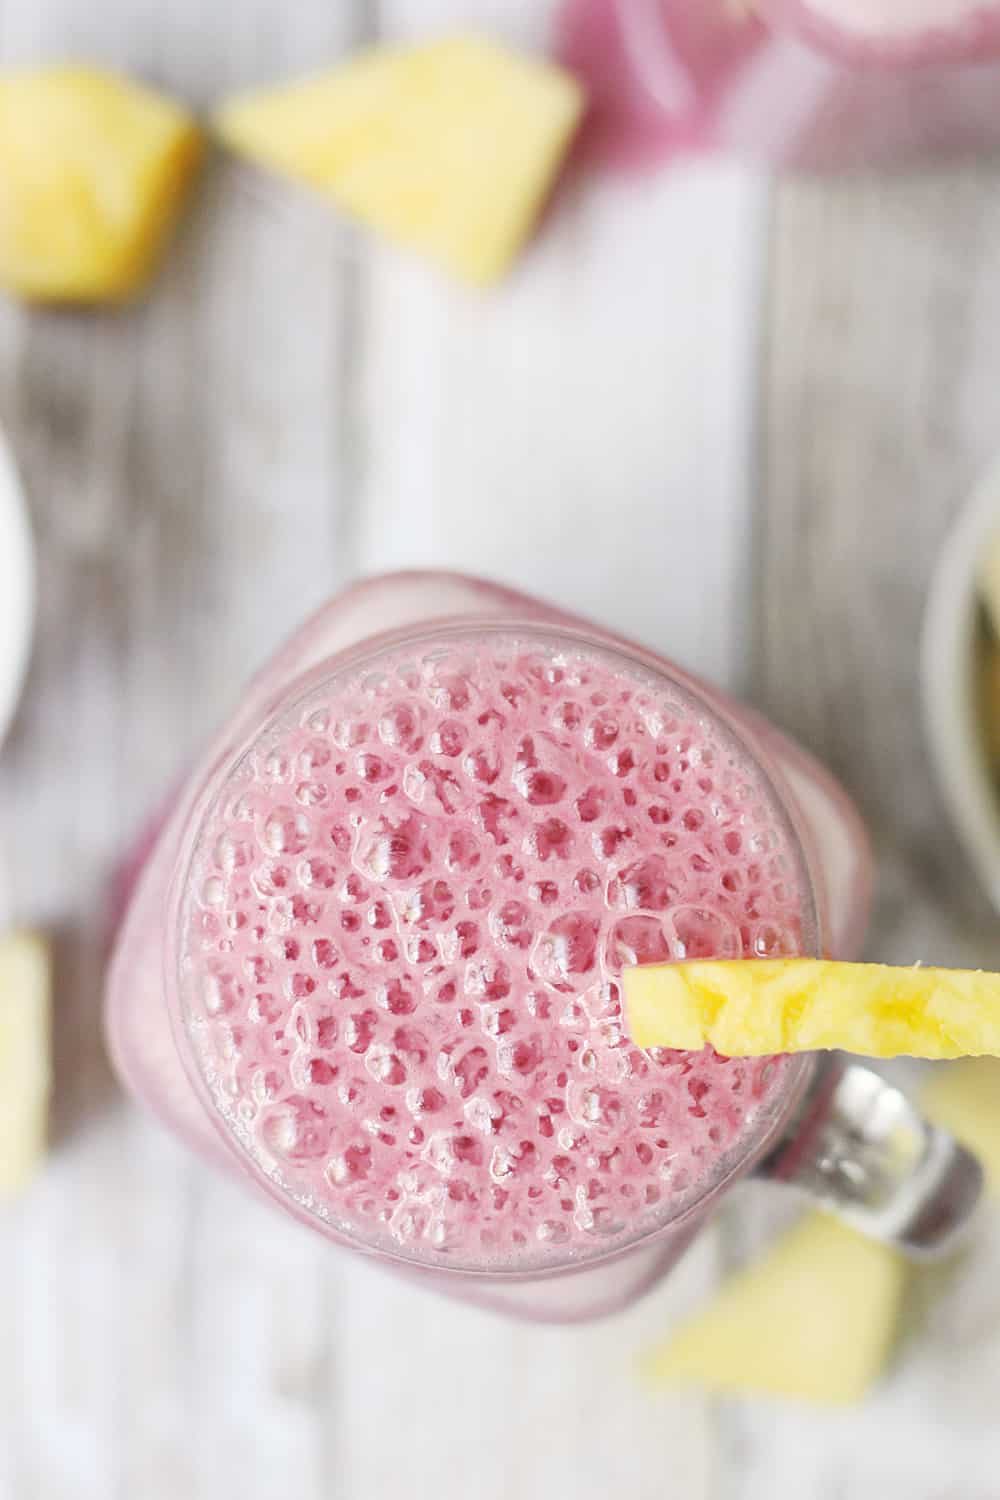 4-Ingredient Pineapple Cranberry Smoothie -- Cranberry lovers will enjoy this 4-ingredient pineapple cranberry smoothie! It features all-natural cranberry juice, frozen pineapple and banana, and Greek yogurt for a tart.